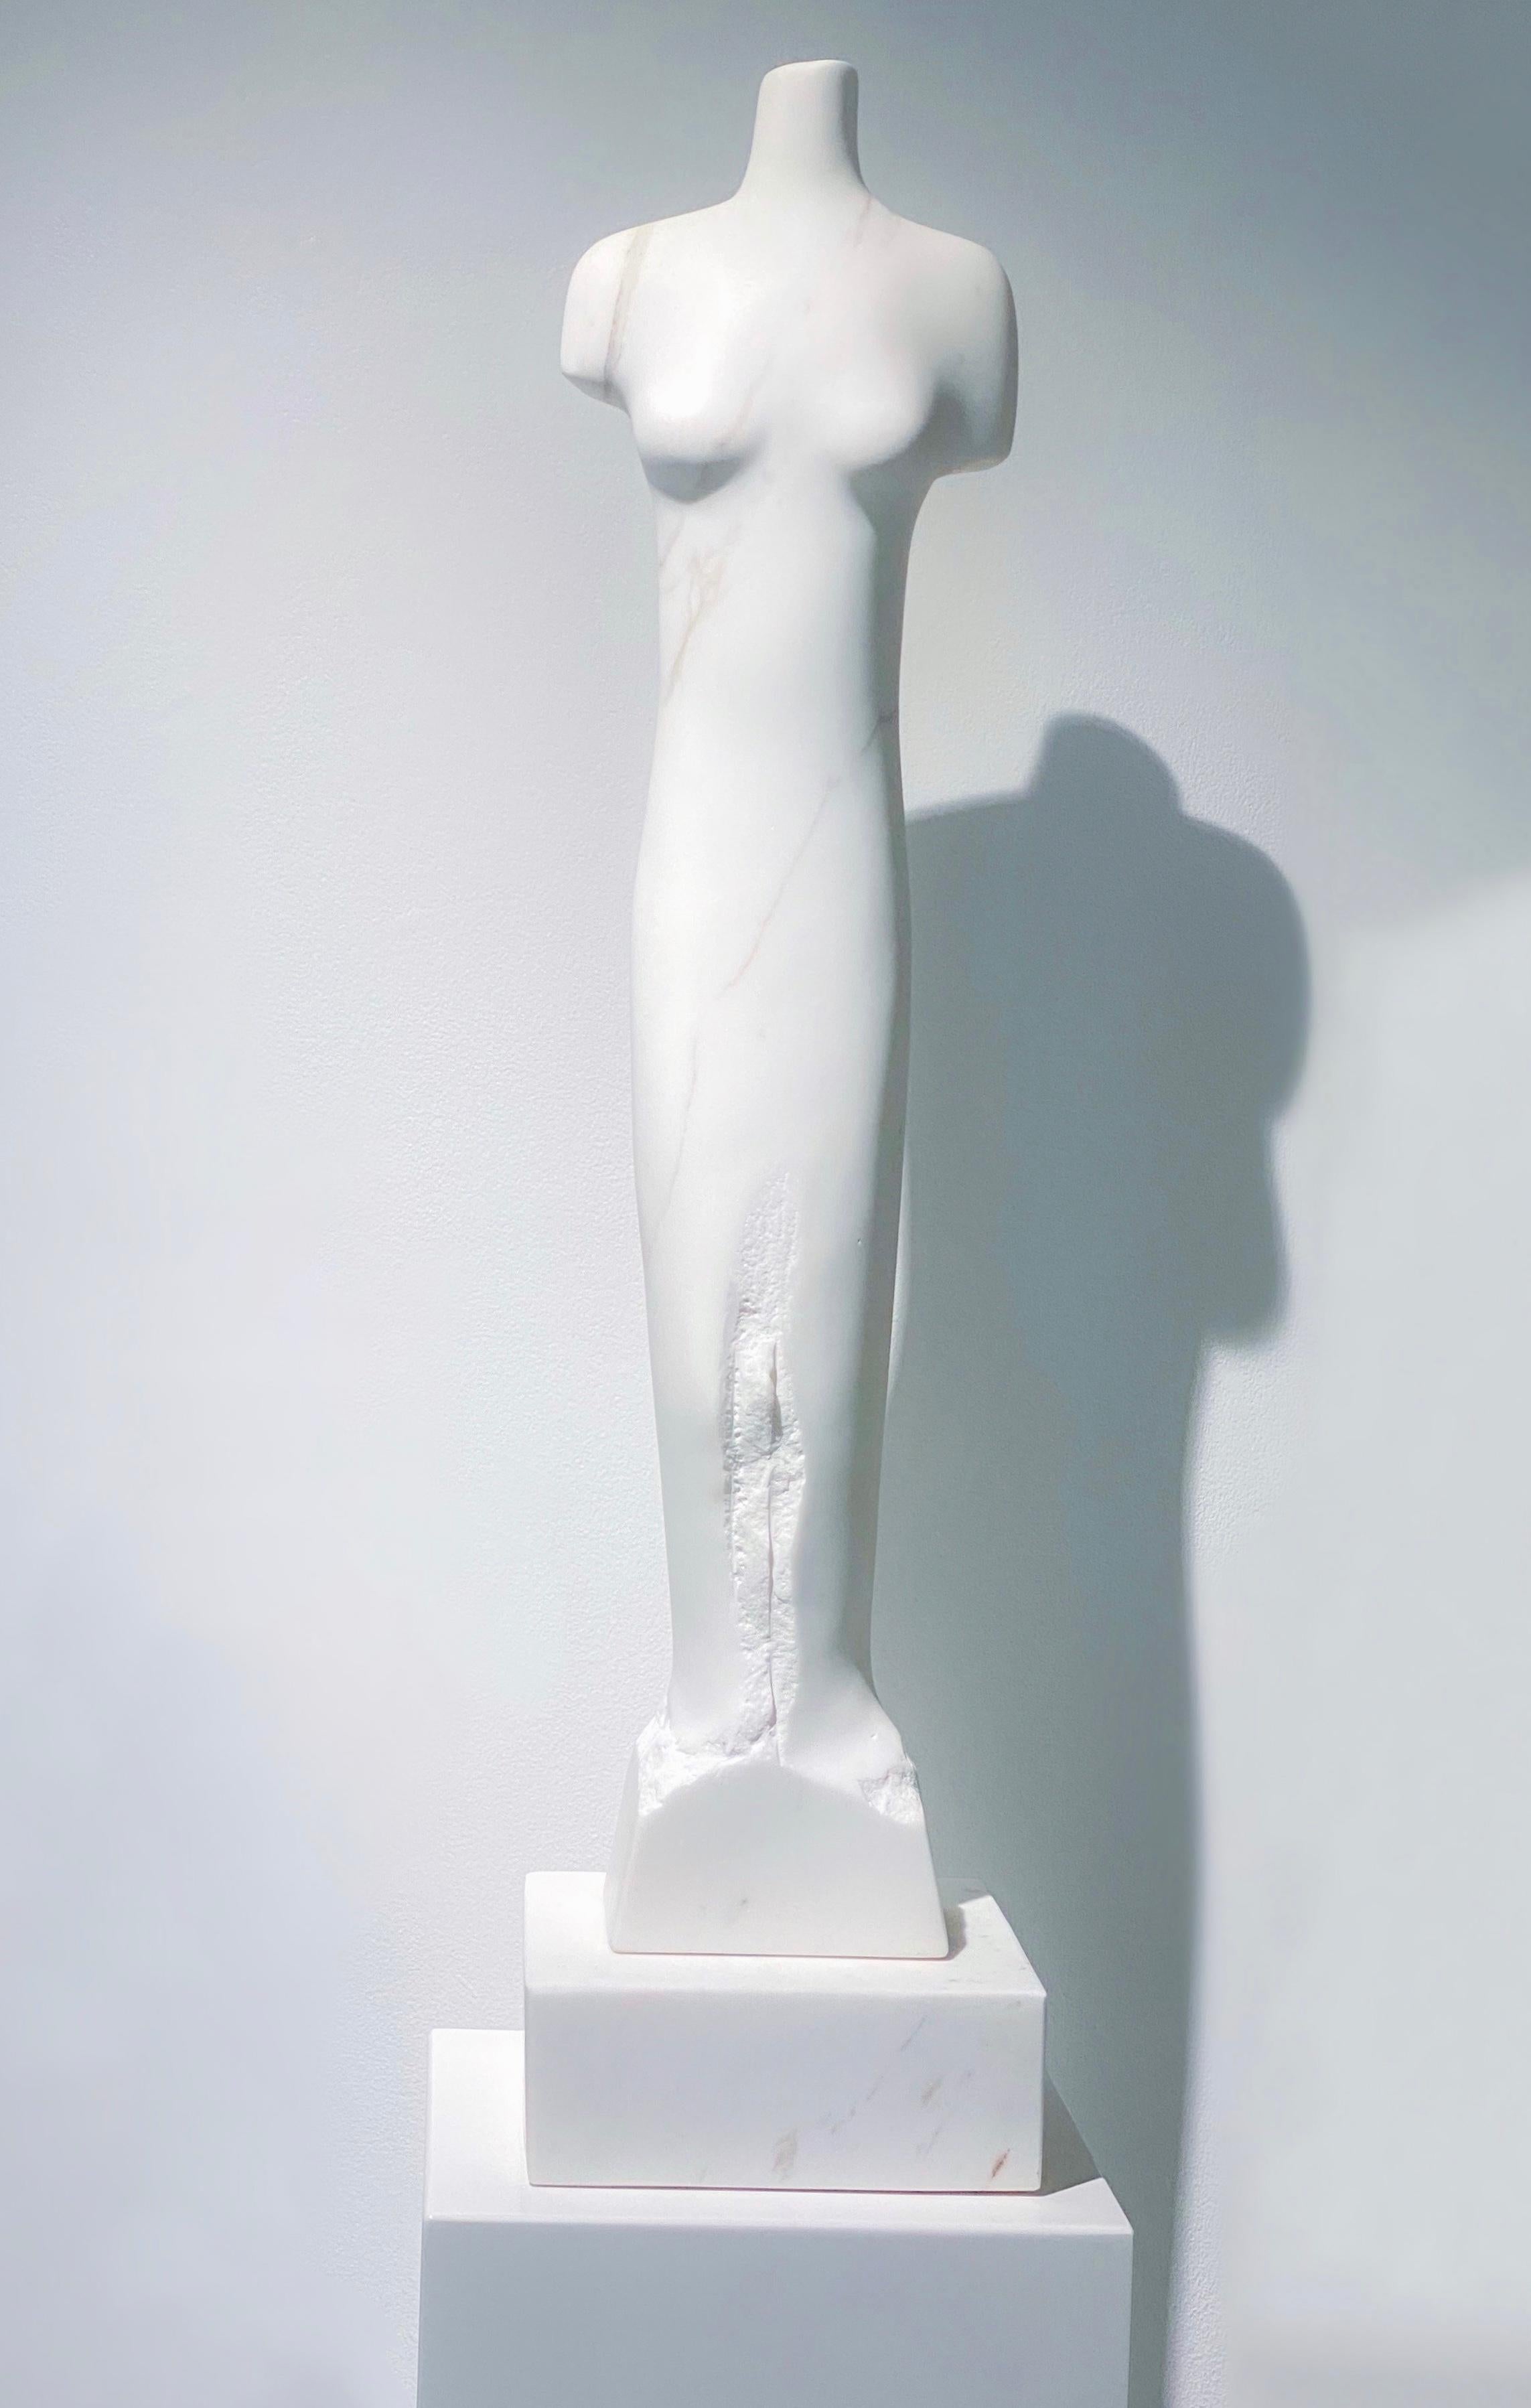 Claire McARDLE
(b. 1954, United States)
Estella
Italian calacatta marble
36 x 9 x 9 inches
Signed in the stone

A native of the Washington D.C. area, after earning a Fine Arts degree from Virginia Commonwealth University, Claire moved to Carrara,